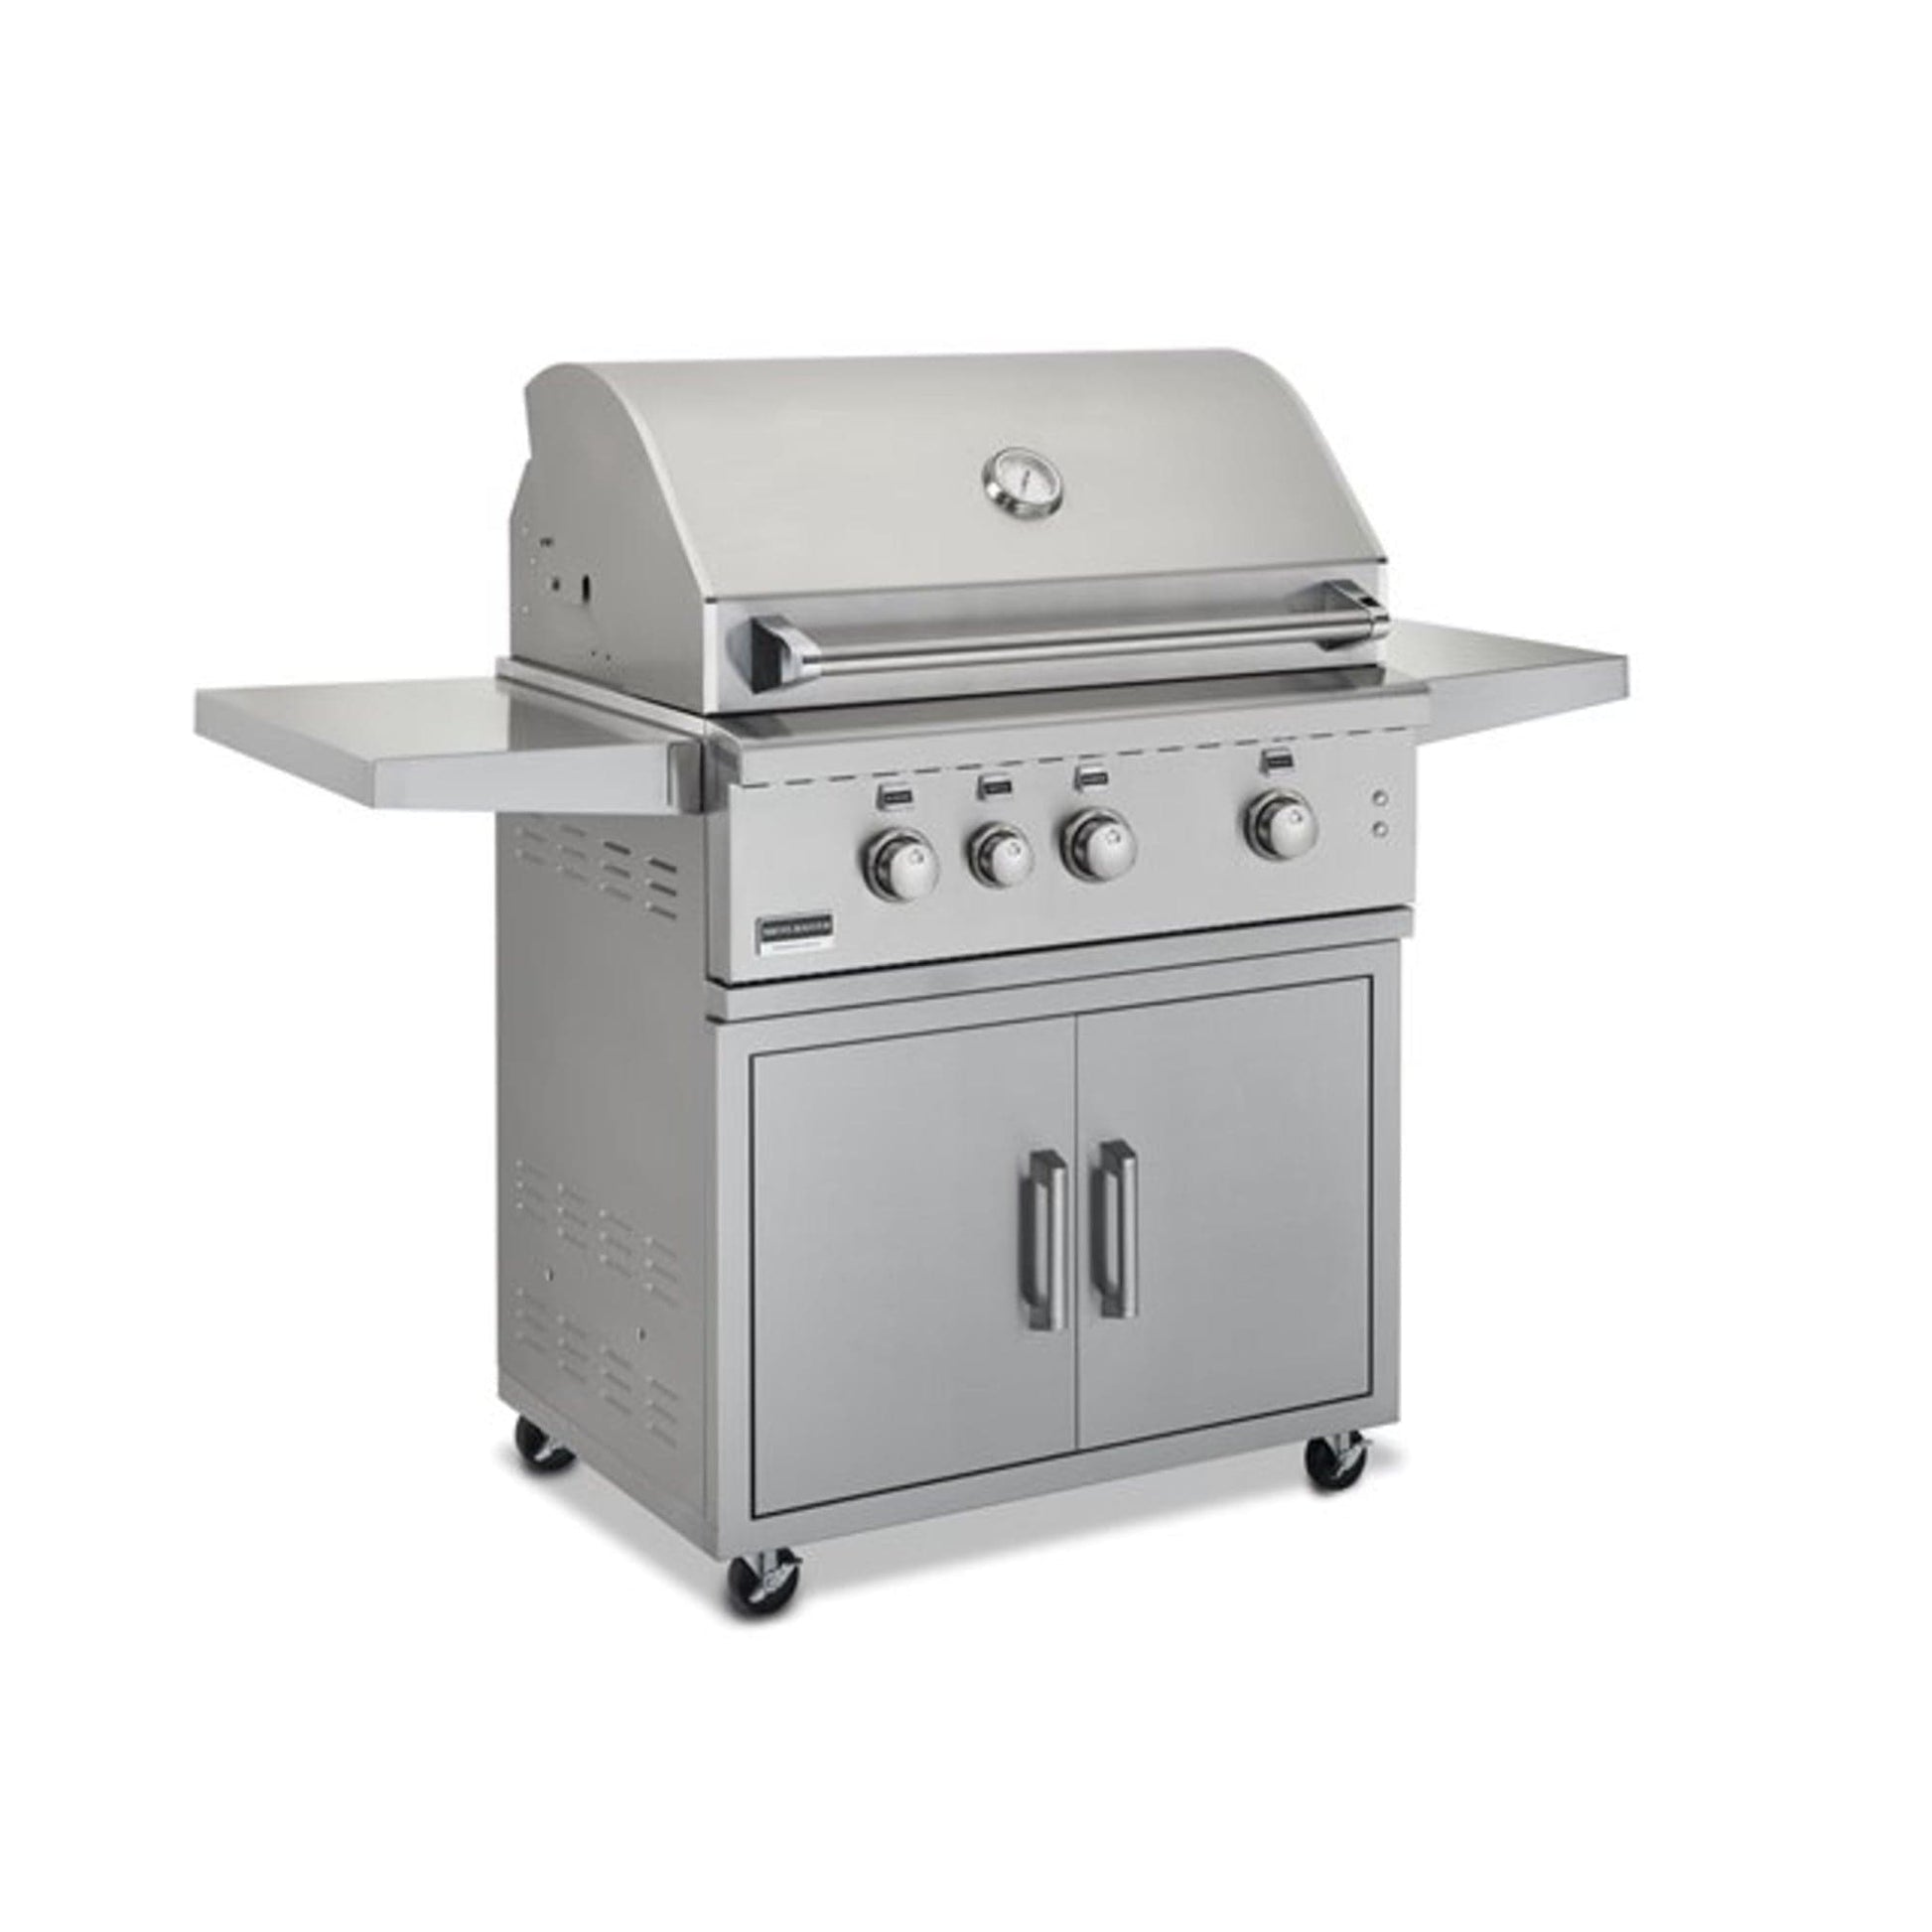 Broilmaster B-Series 32" 4-Burner Stainless Steel Propane Grill Head With Built-In Infrared Burner and Cooking Lights